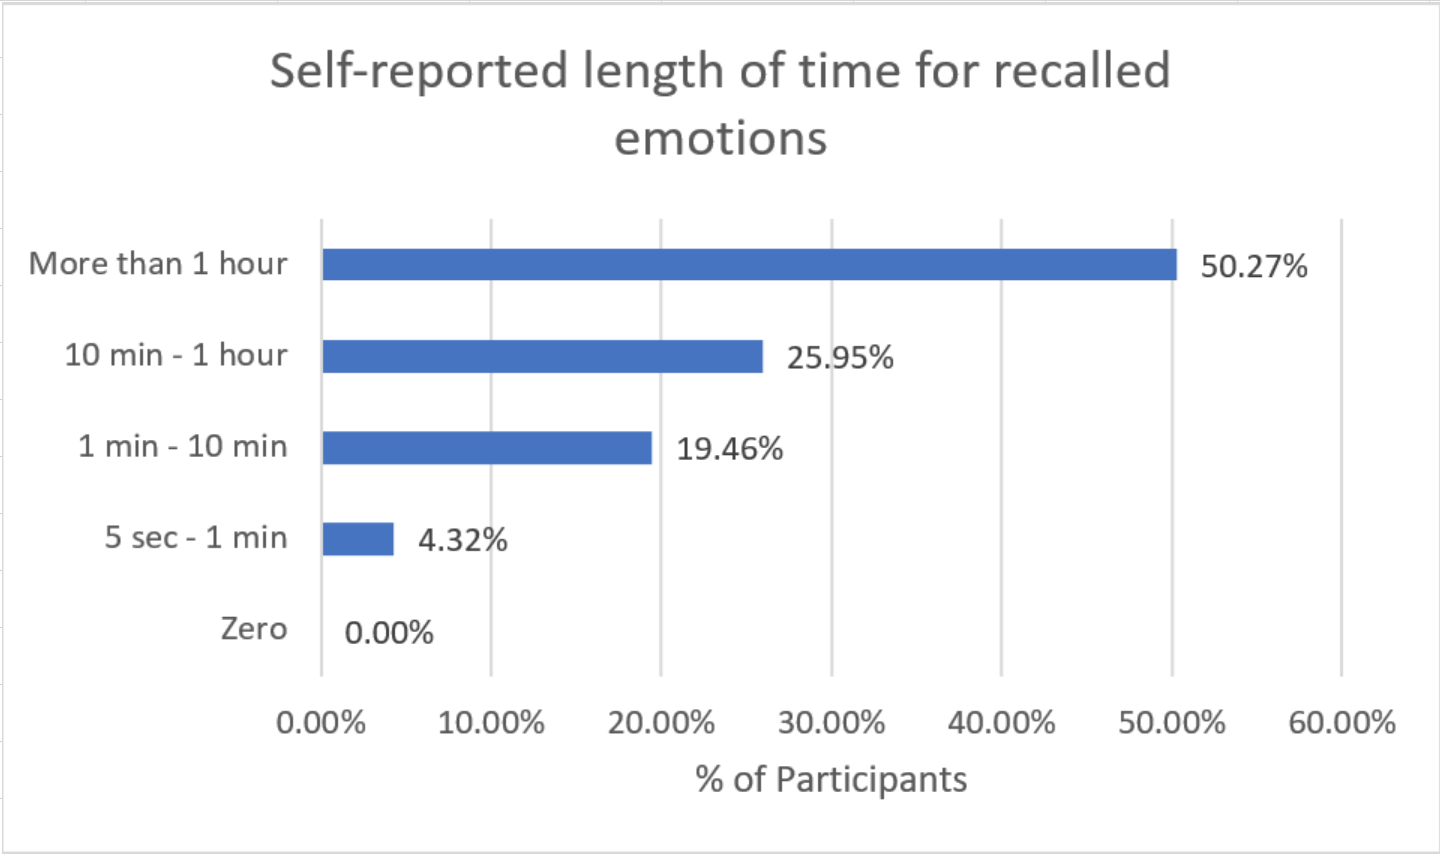 A bar-graph titled "Self-reported length of time for recalled emotions" The y-axis has 5 labels from top to bottom as follows: More than 1 hour, 10 min to 1 hour, 1 min to 10 min, 5 seconds to 1 min, and zero. The x-axis is labeled percent of participants from 0% to 60%. The results are illustrated as follows, 50.27% of participants reported more than 1 hour, 25.95% of participants reported 10 min to 1 hour, 19.46% of participants reported 1 min to 10 min, 4.32% of participants reported 5 seconds to 1 min, and 0% of participants reported zero.